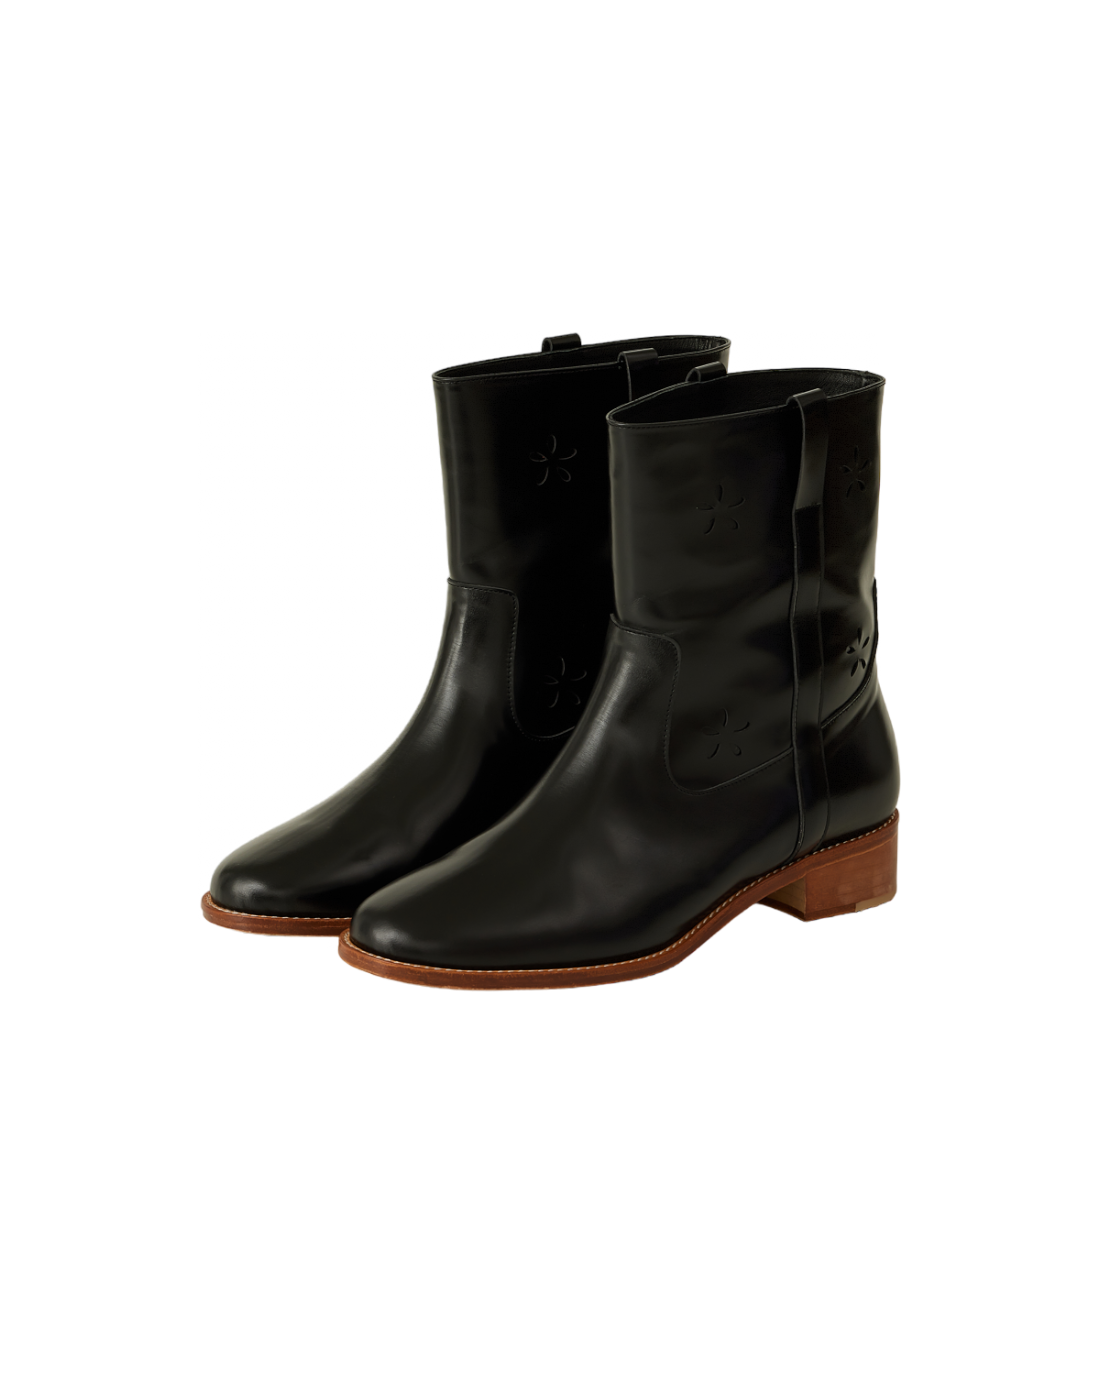 Willa Signature Boots In Brown